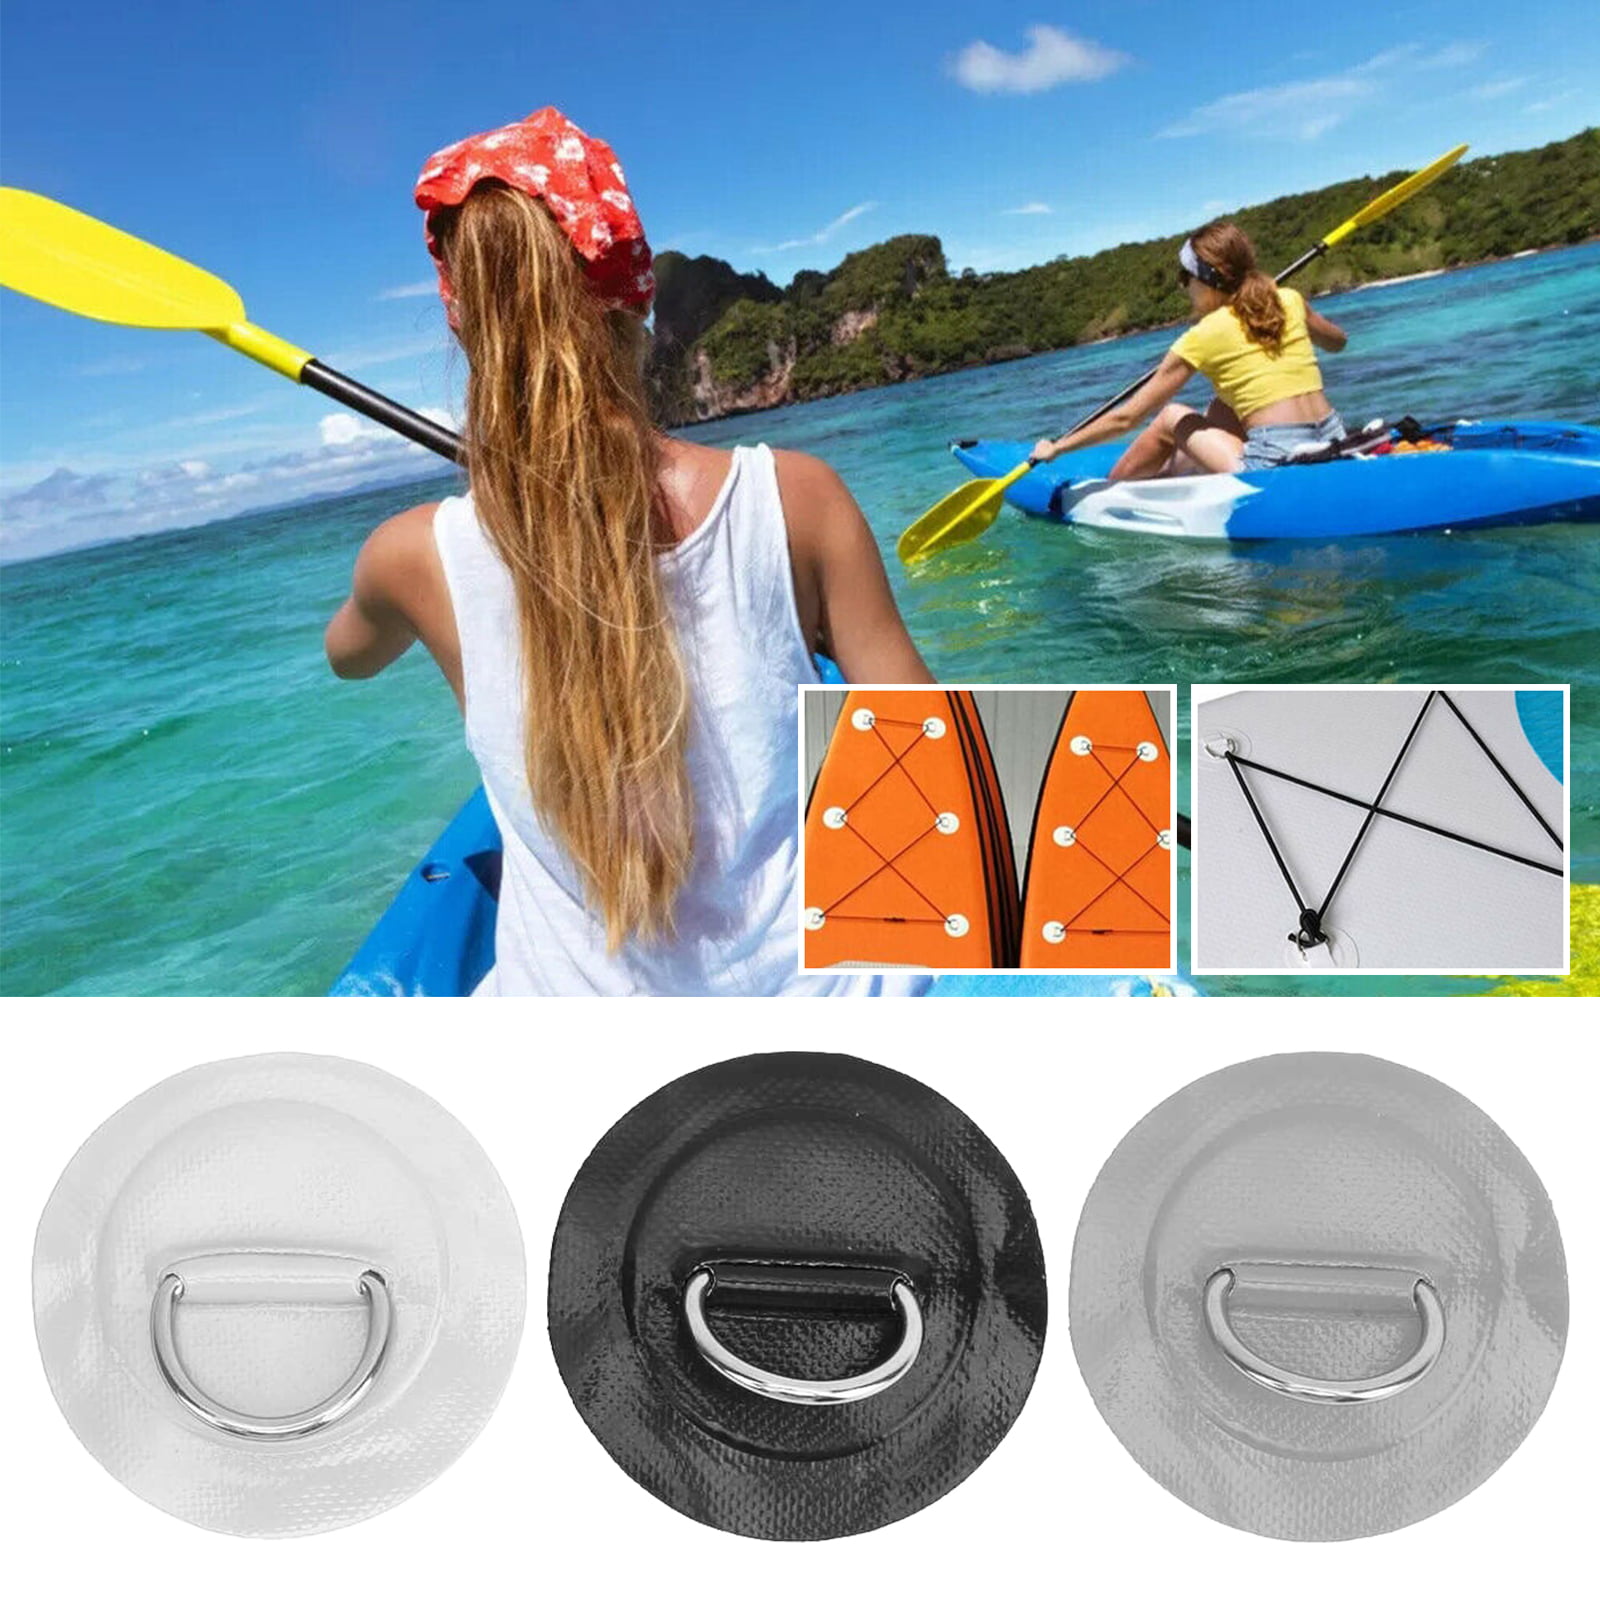 4Pcs Stainless Steel D-ring Pad/patch for PVC Inflatable Boat Raft Dinghy Kayak 